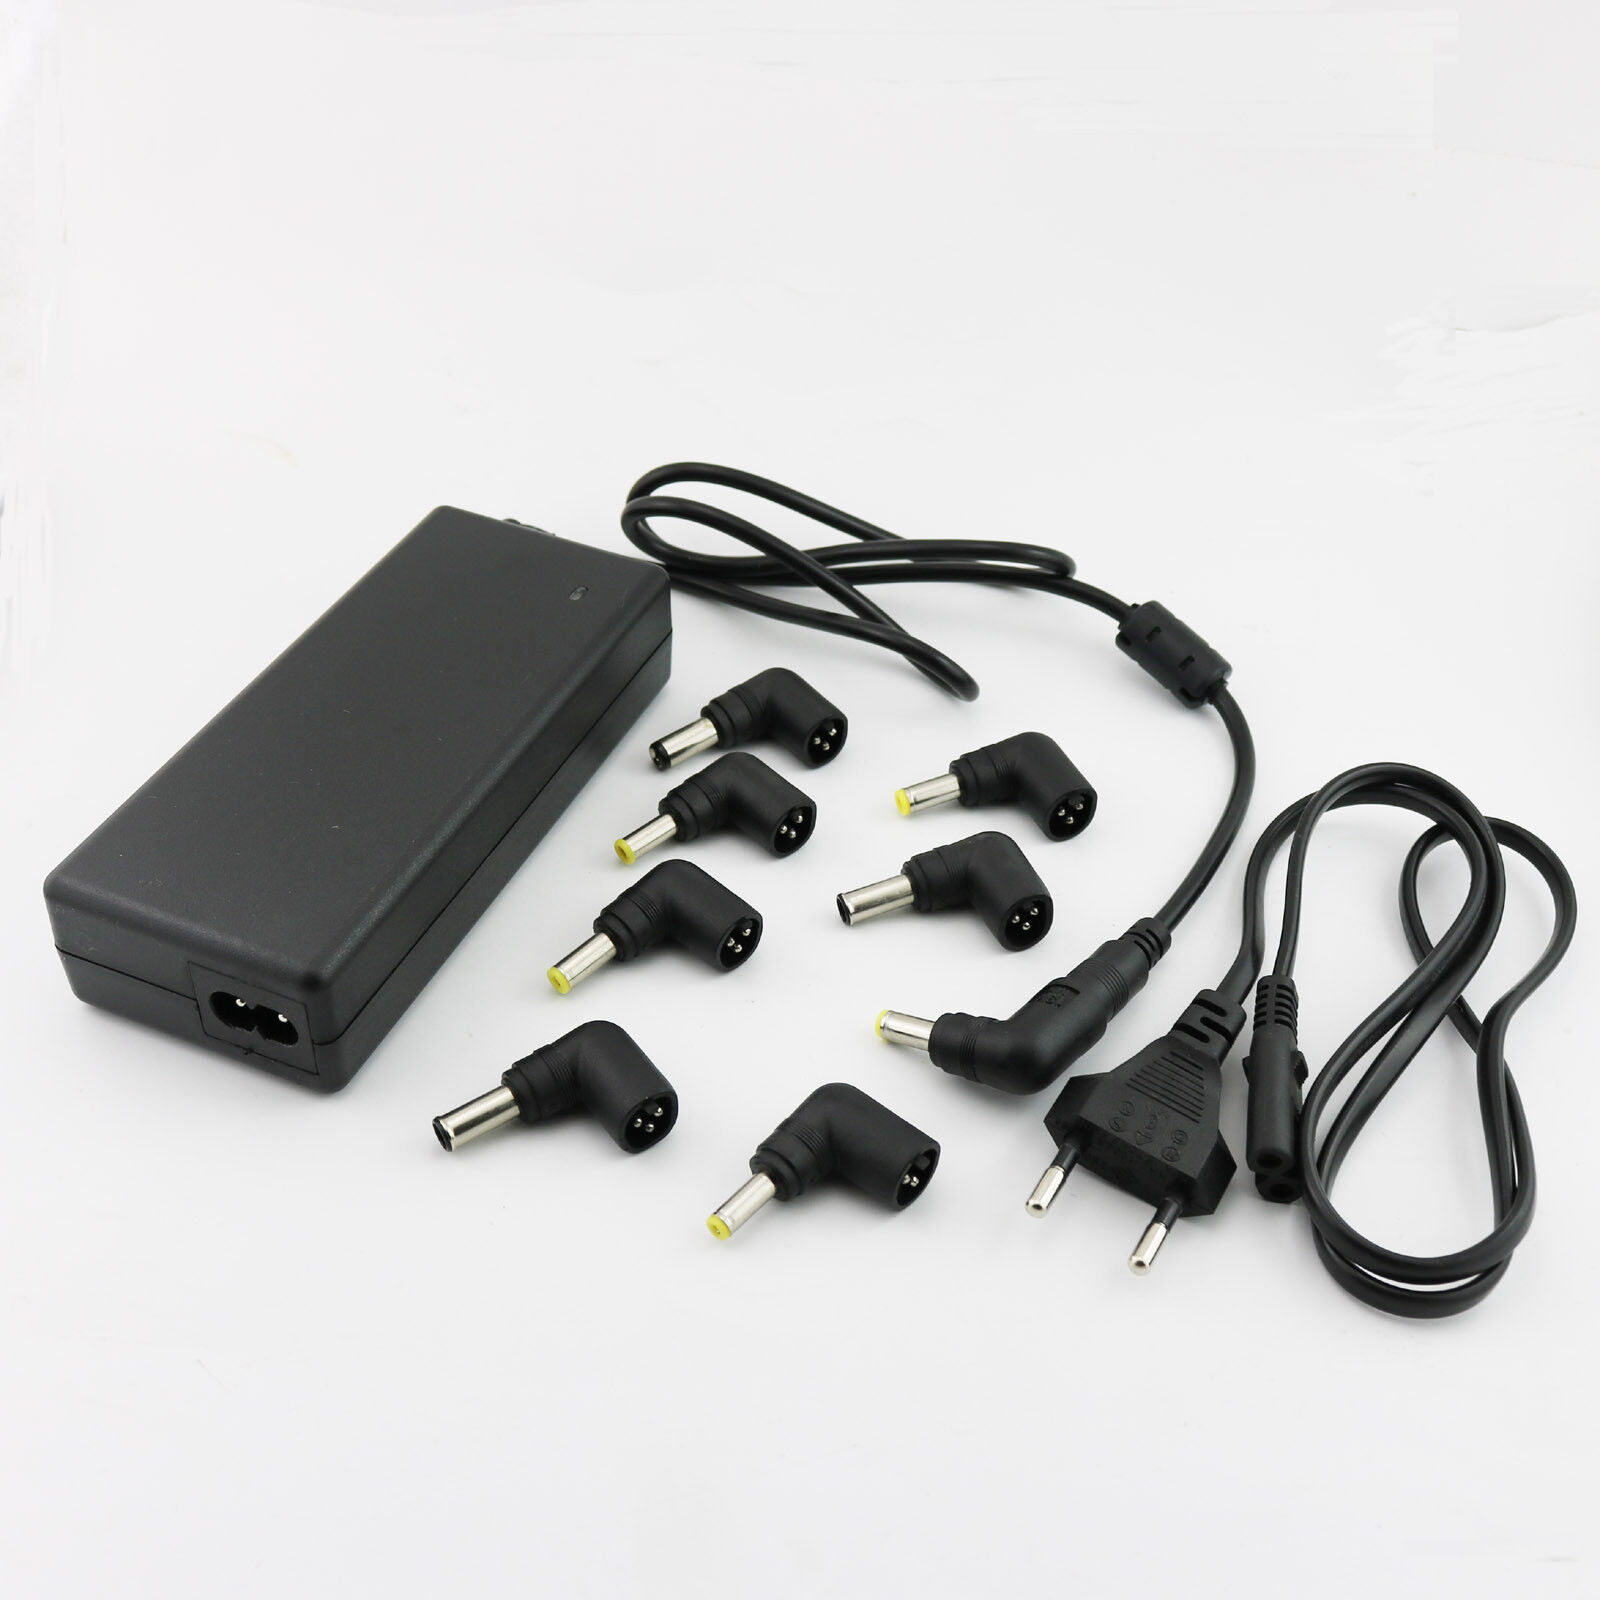 1x 90W Universal Power Supply Wall Charge AC Adapter for Laptop Notebook 8 Tips